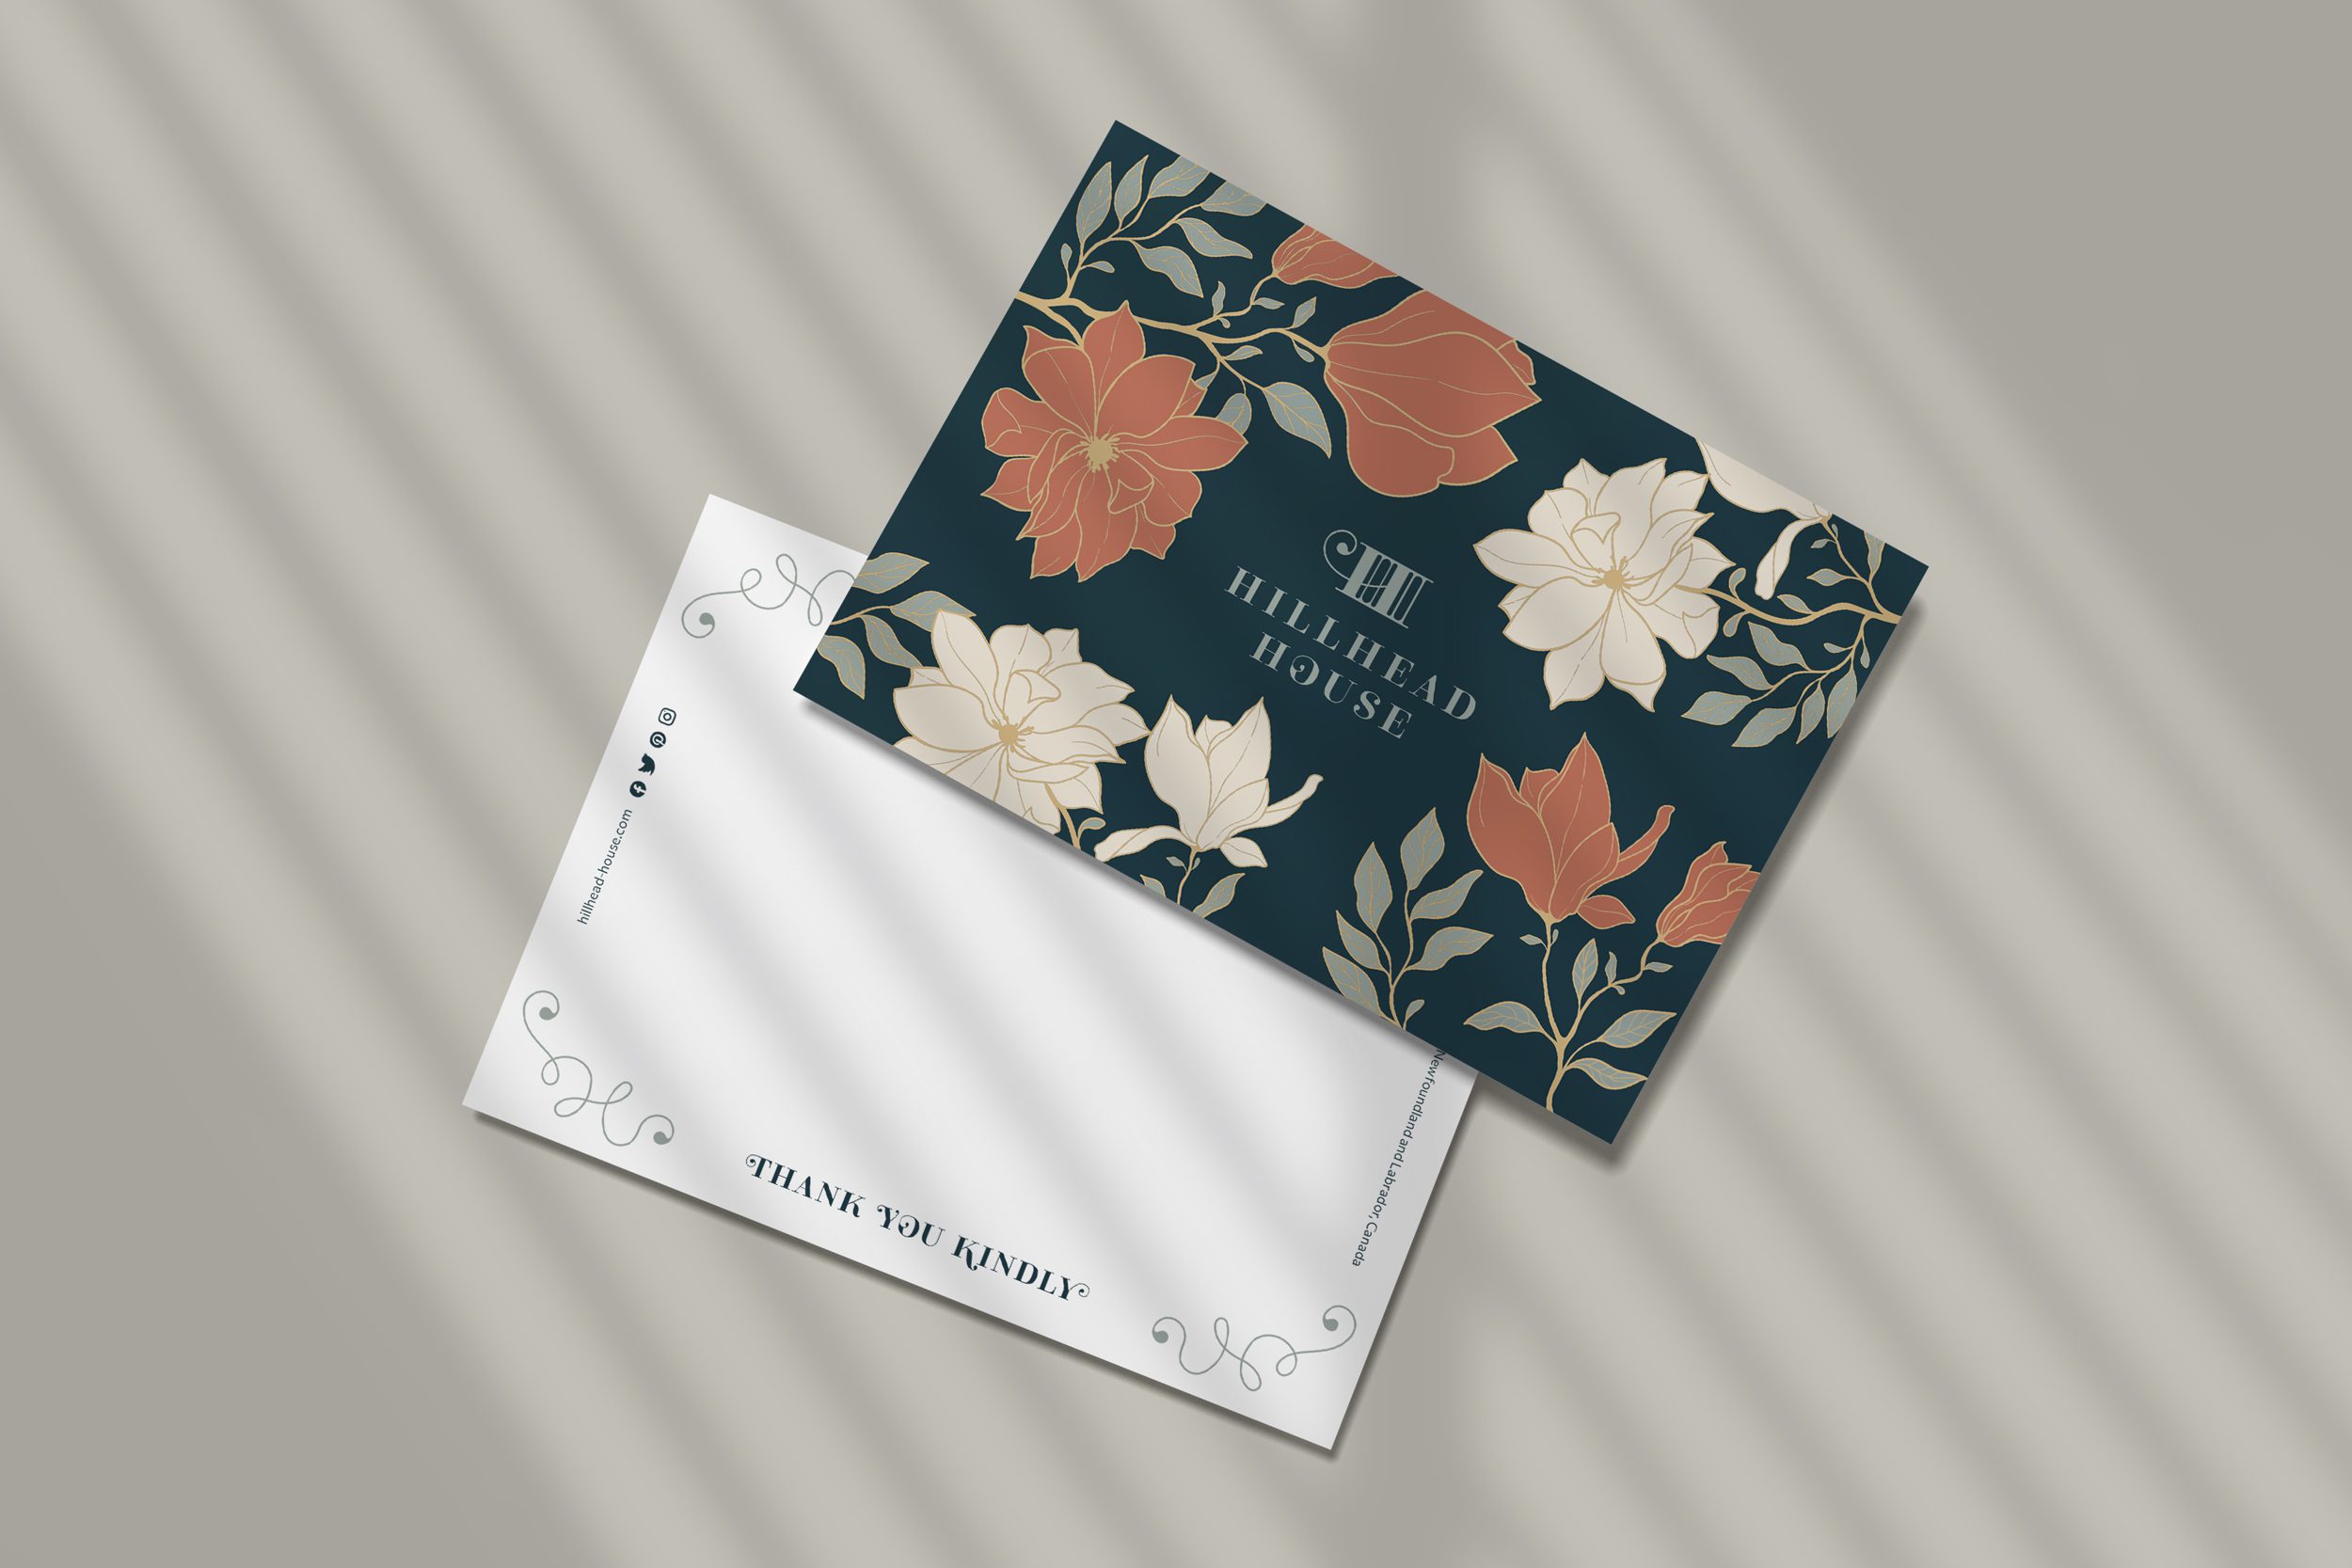 A postcard for Hillhead House shop with a strong floral pattern on the front